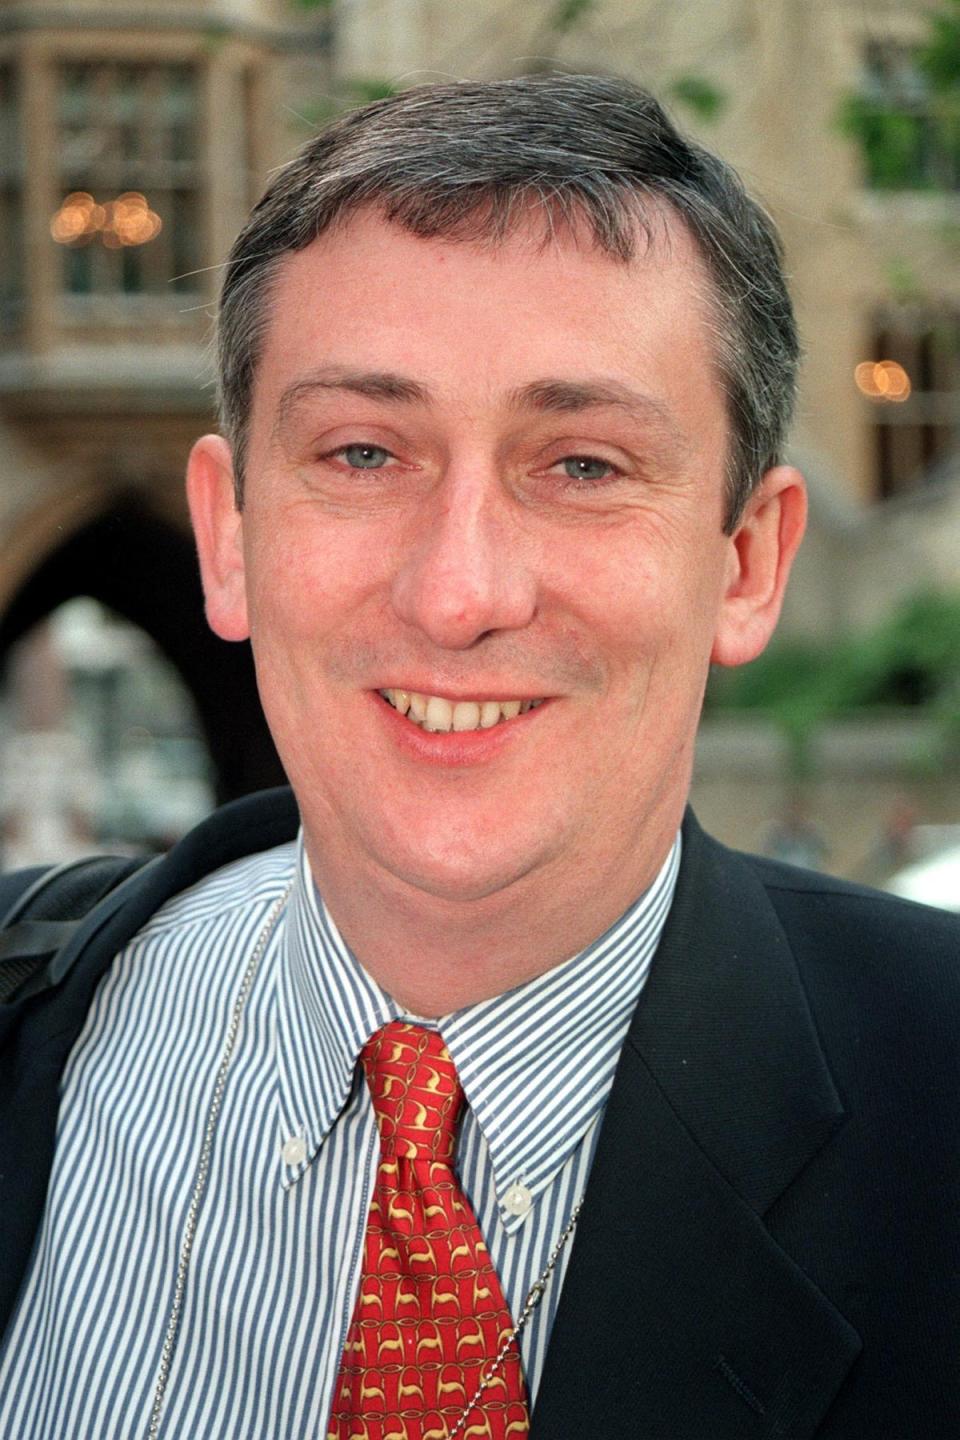 Labour MP Lindsay Hoyle in 1997